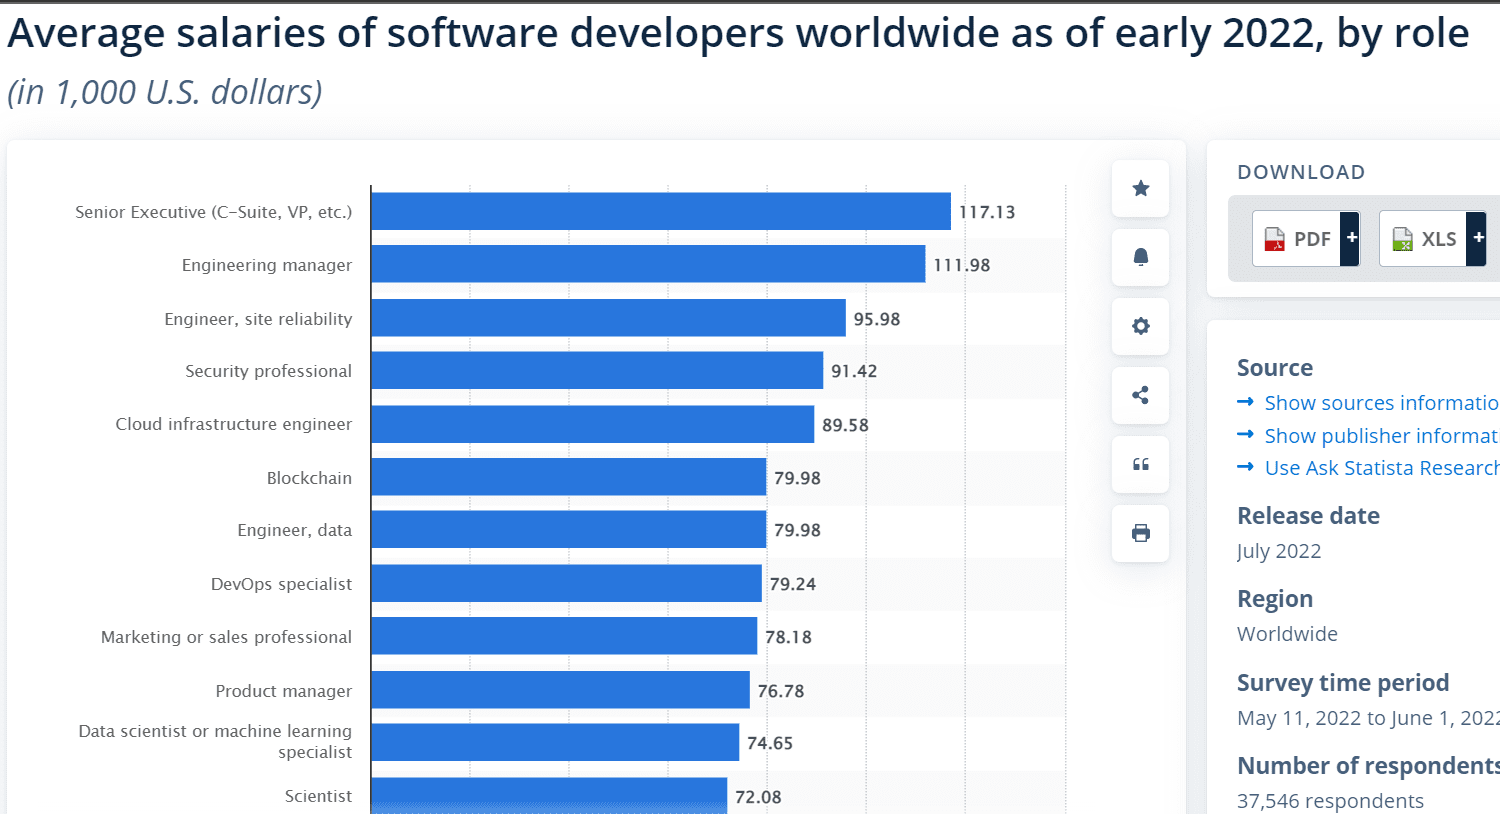 Average salaries of software developers worldwide as of early 2022